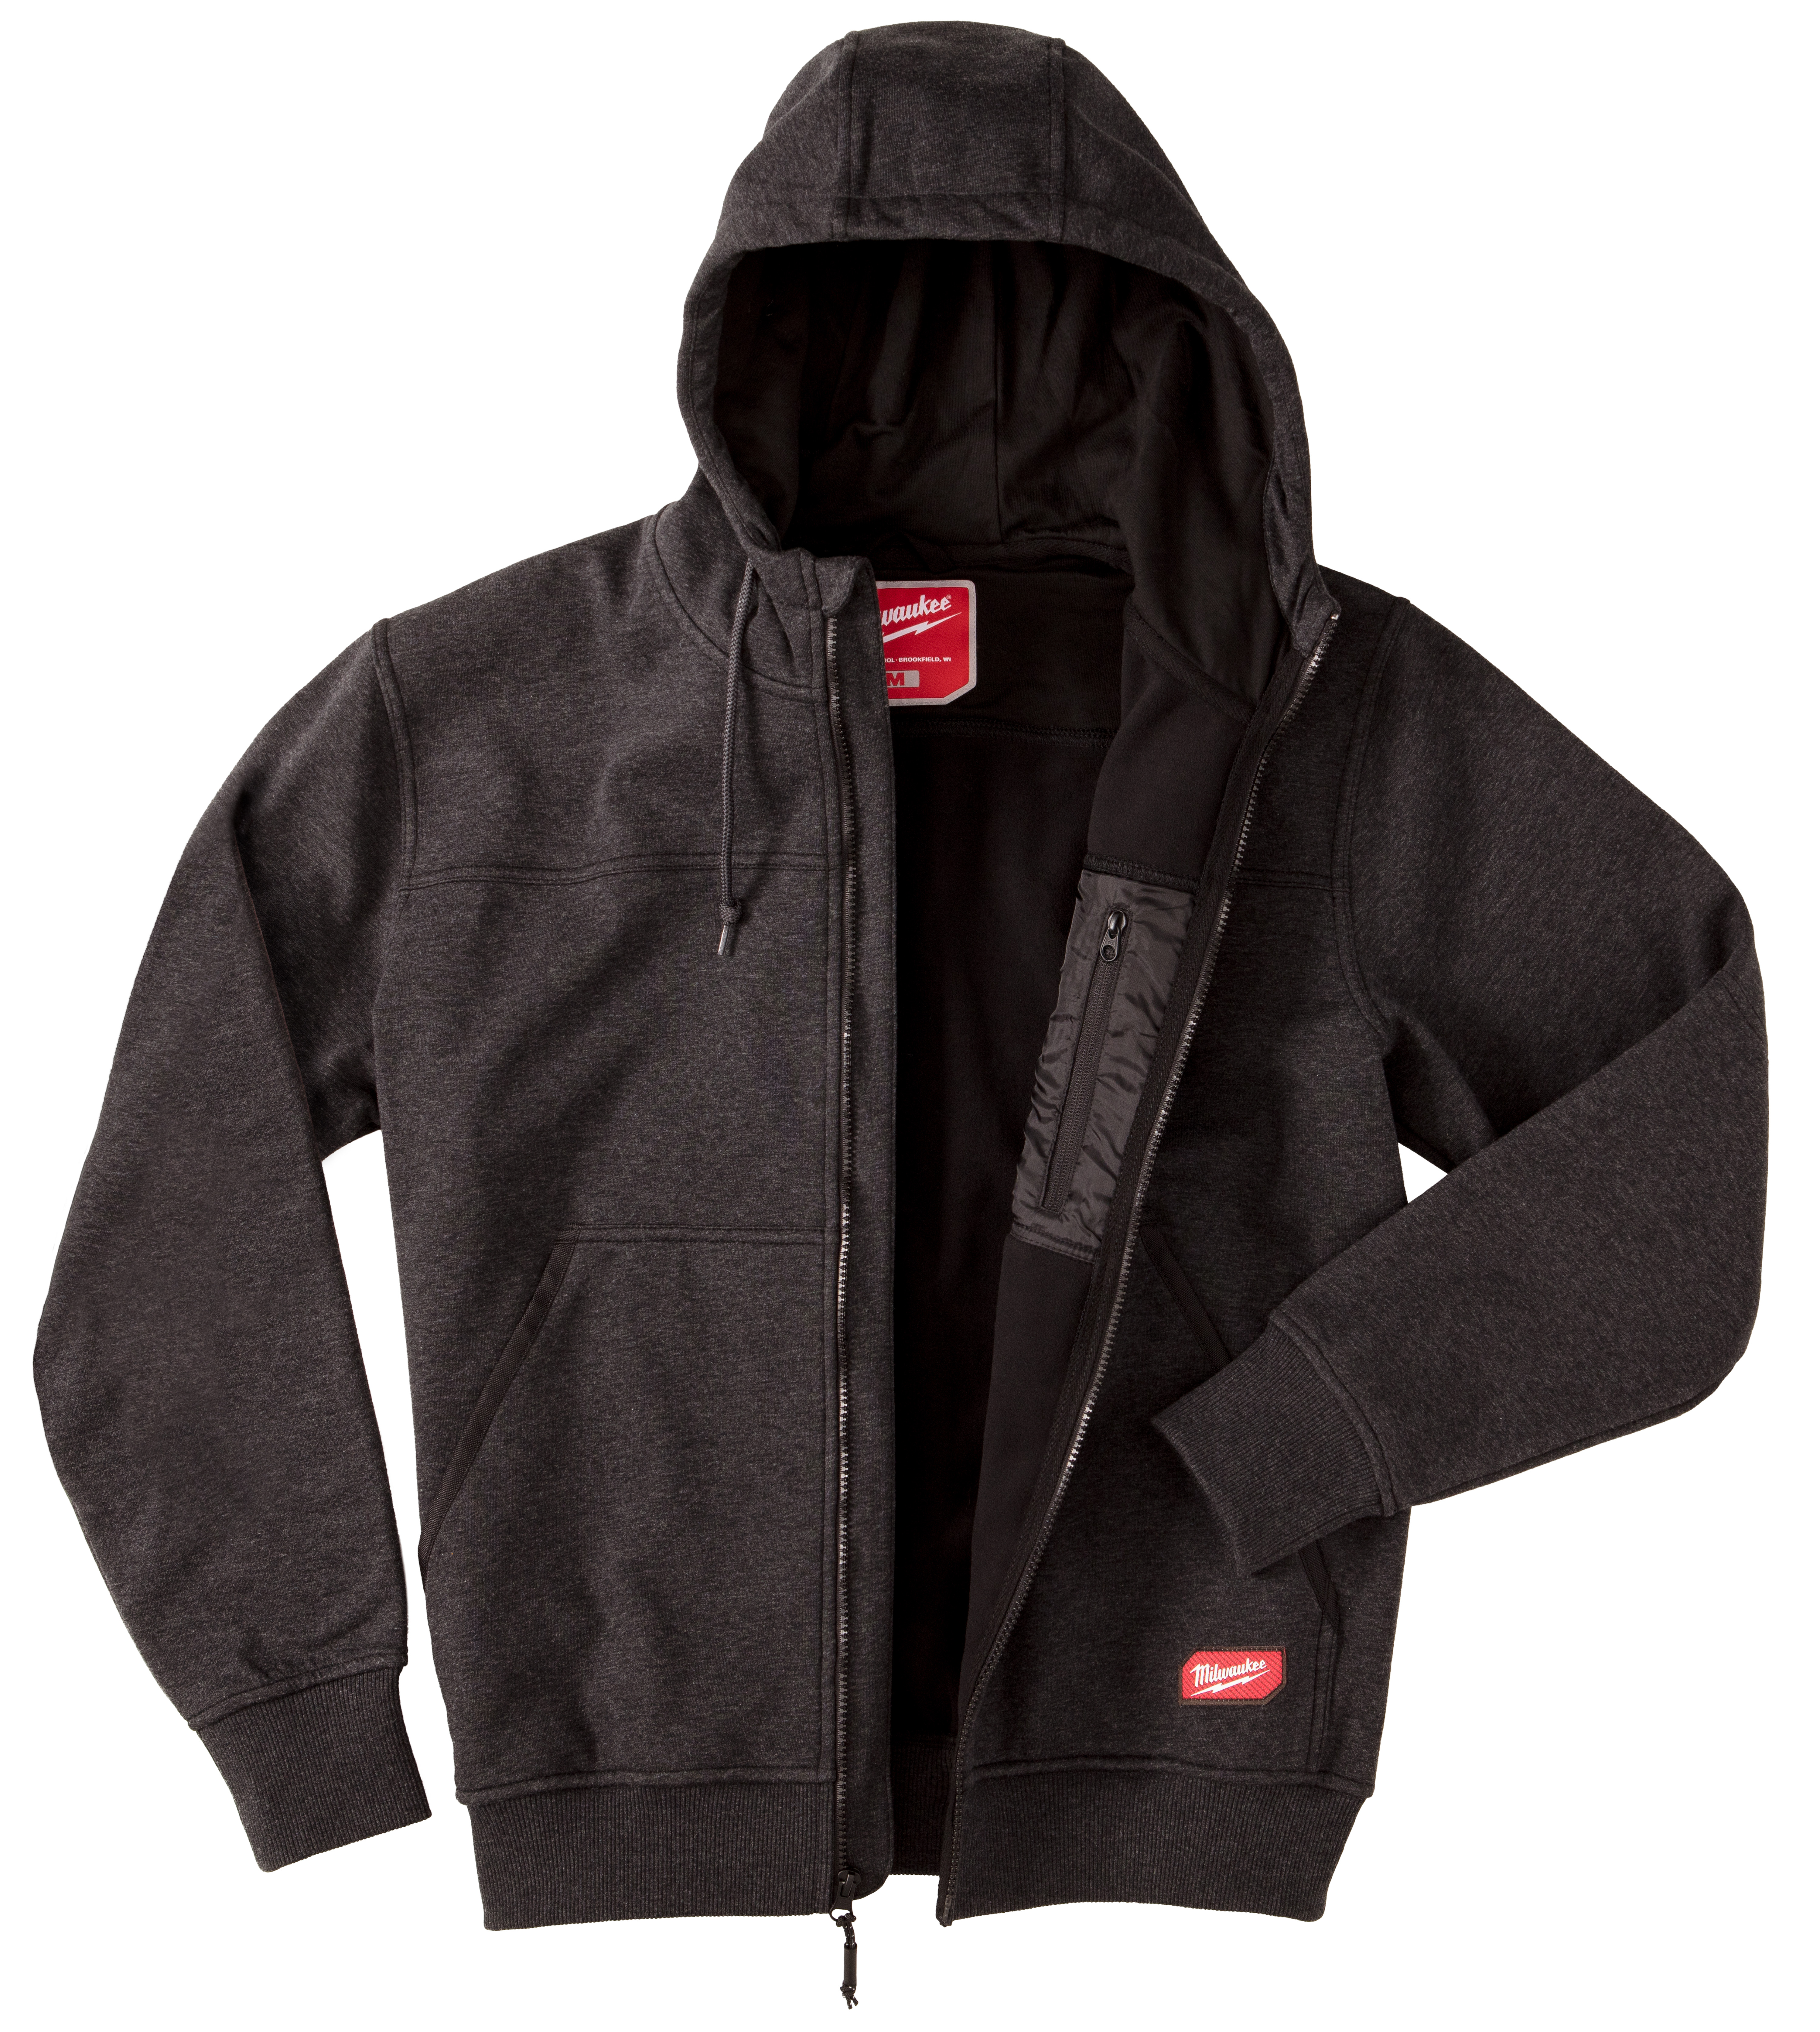 Redefining the most common layering item on the jobsite, the Milwaukee® NO DAYS OFF™ hooded sweatshirt combines wind and water resistance with a comfortable fleece lining to provide all season versatility. The addition of a fitted hood designed to be worn under a hard hat, extended neck, and interior storm flap provide additional protection from the weather. Durable polyester body material and double layer reinforcement of pocket edges and forearms extend product life when used in demanding jobsite environments. Built for all conditions, the NO DAYS OFF™ hooded sweatshirt fights the rain when worn as an outer shell, and provides wind protection and insulation when used as a versatile layer in extreme cold.